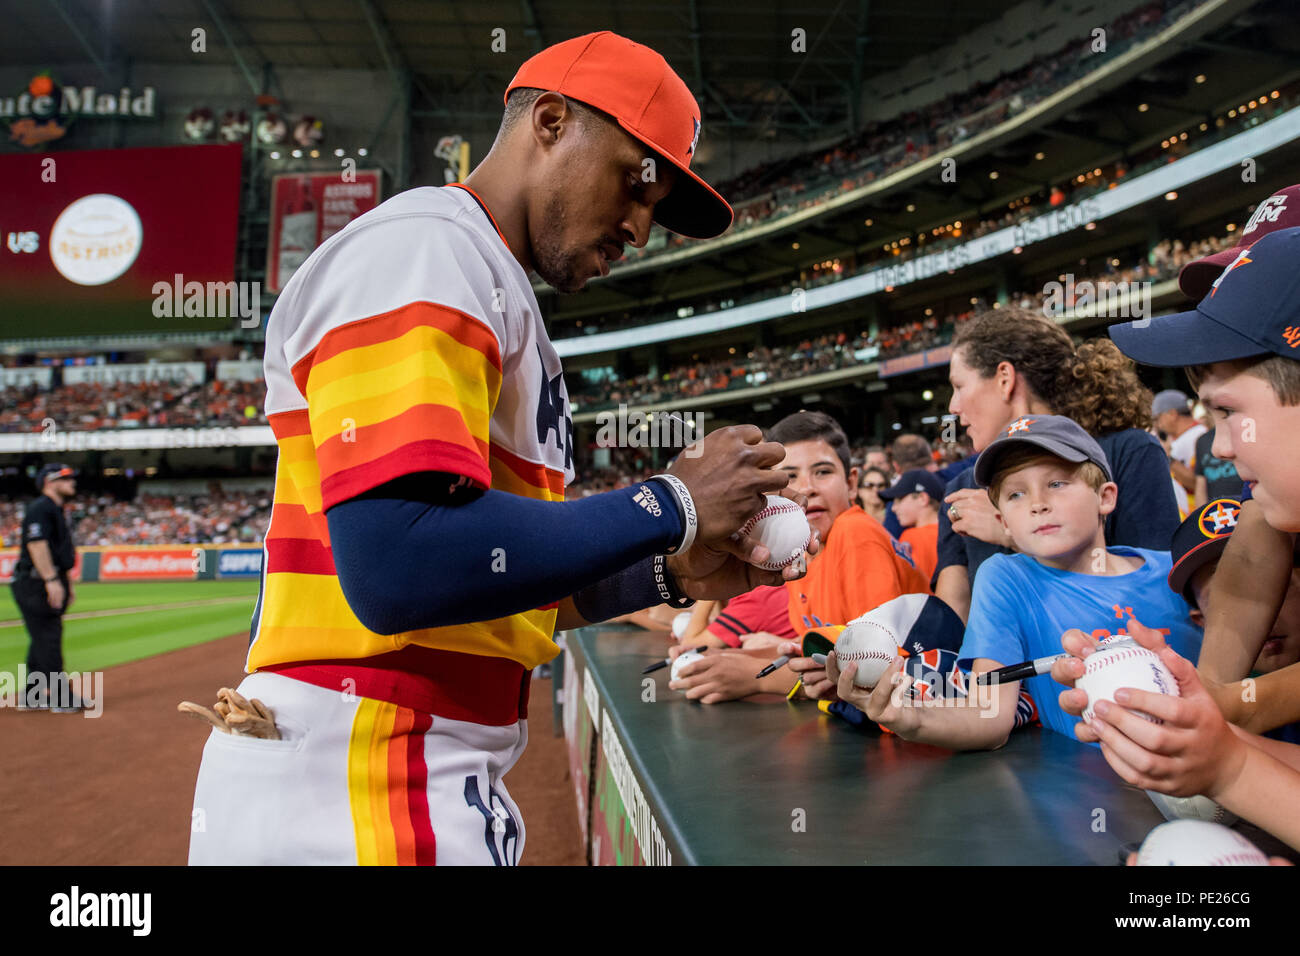 August 10, 2018: Houston Astros left fielder Tony Kemp (18) signs baseballs  for fans prior to a Major League Baseball game between the Houston Astros  and the Seattle Mariners on 1970s night